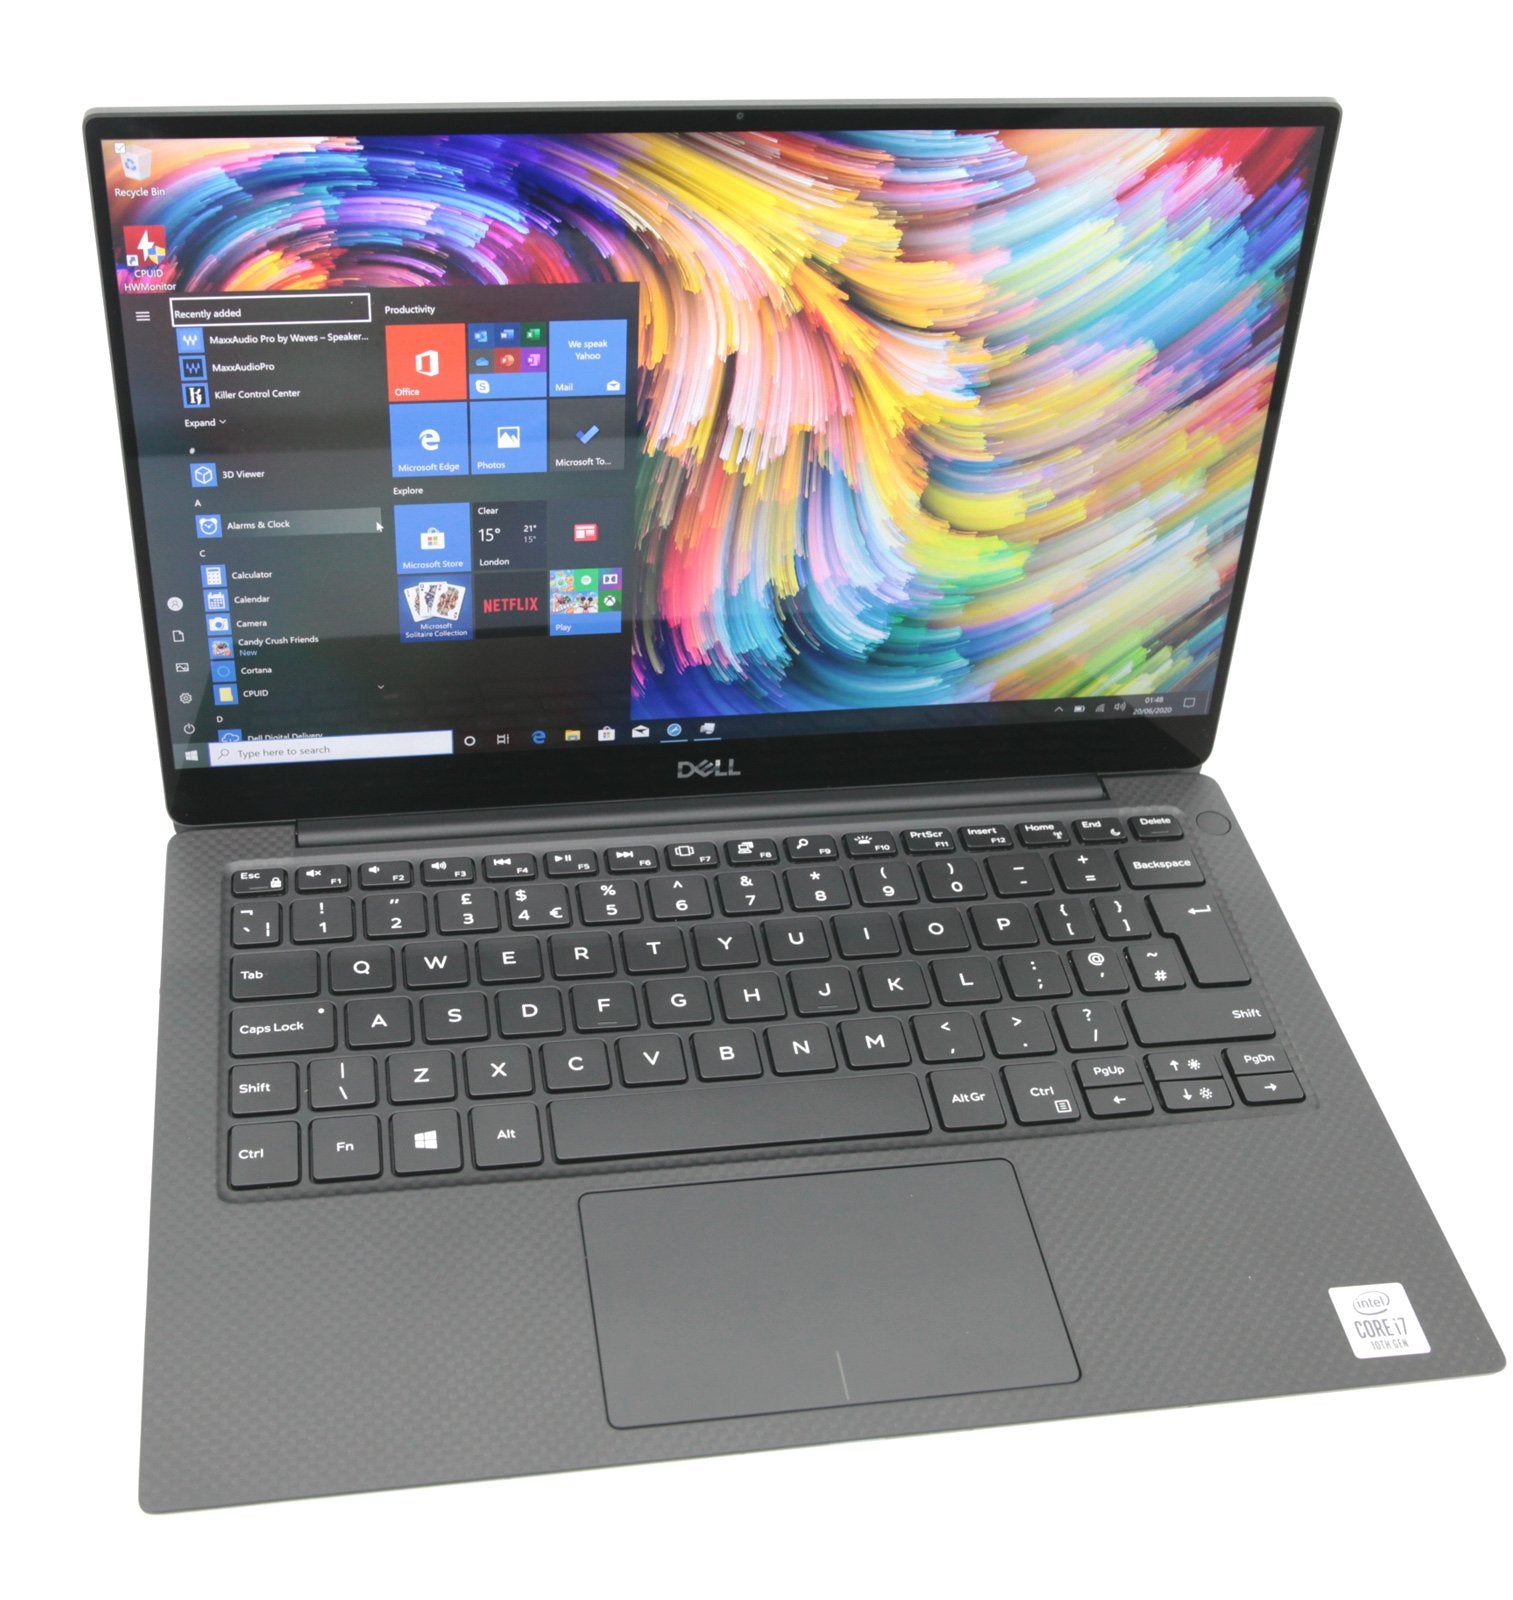 Dell XPS 13 7390 4K Touch Screen Laptop: Core i7-10510U, 512GB, 16GB